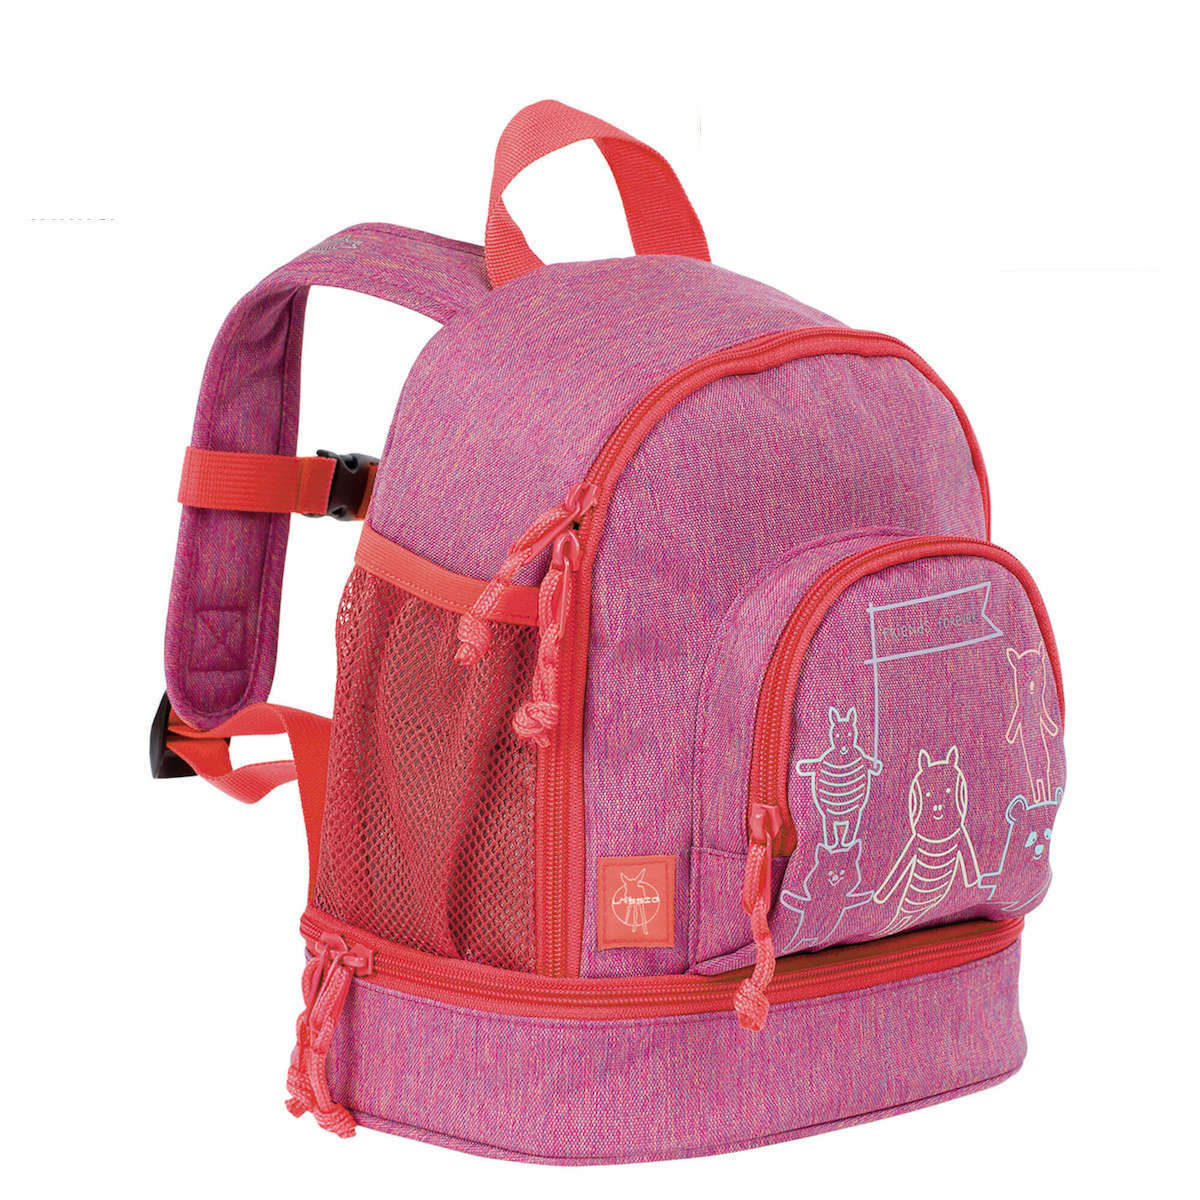 Lassig About Friends Mini Backpack - Pink